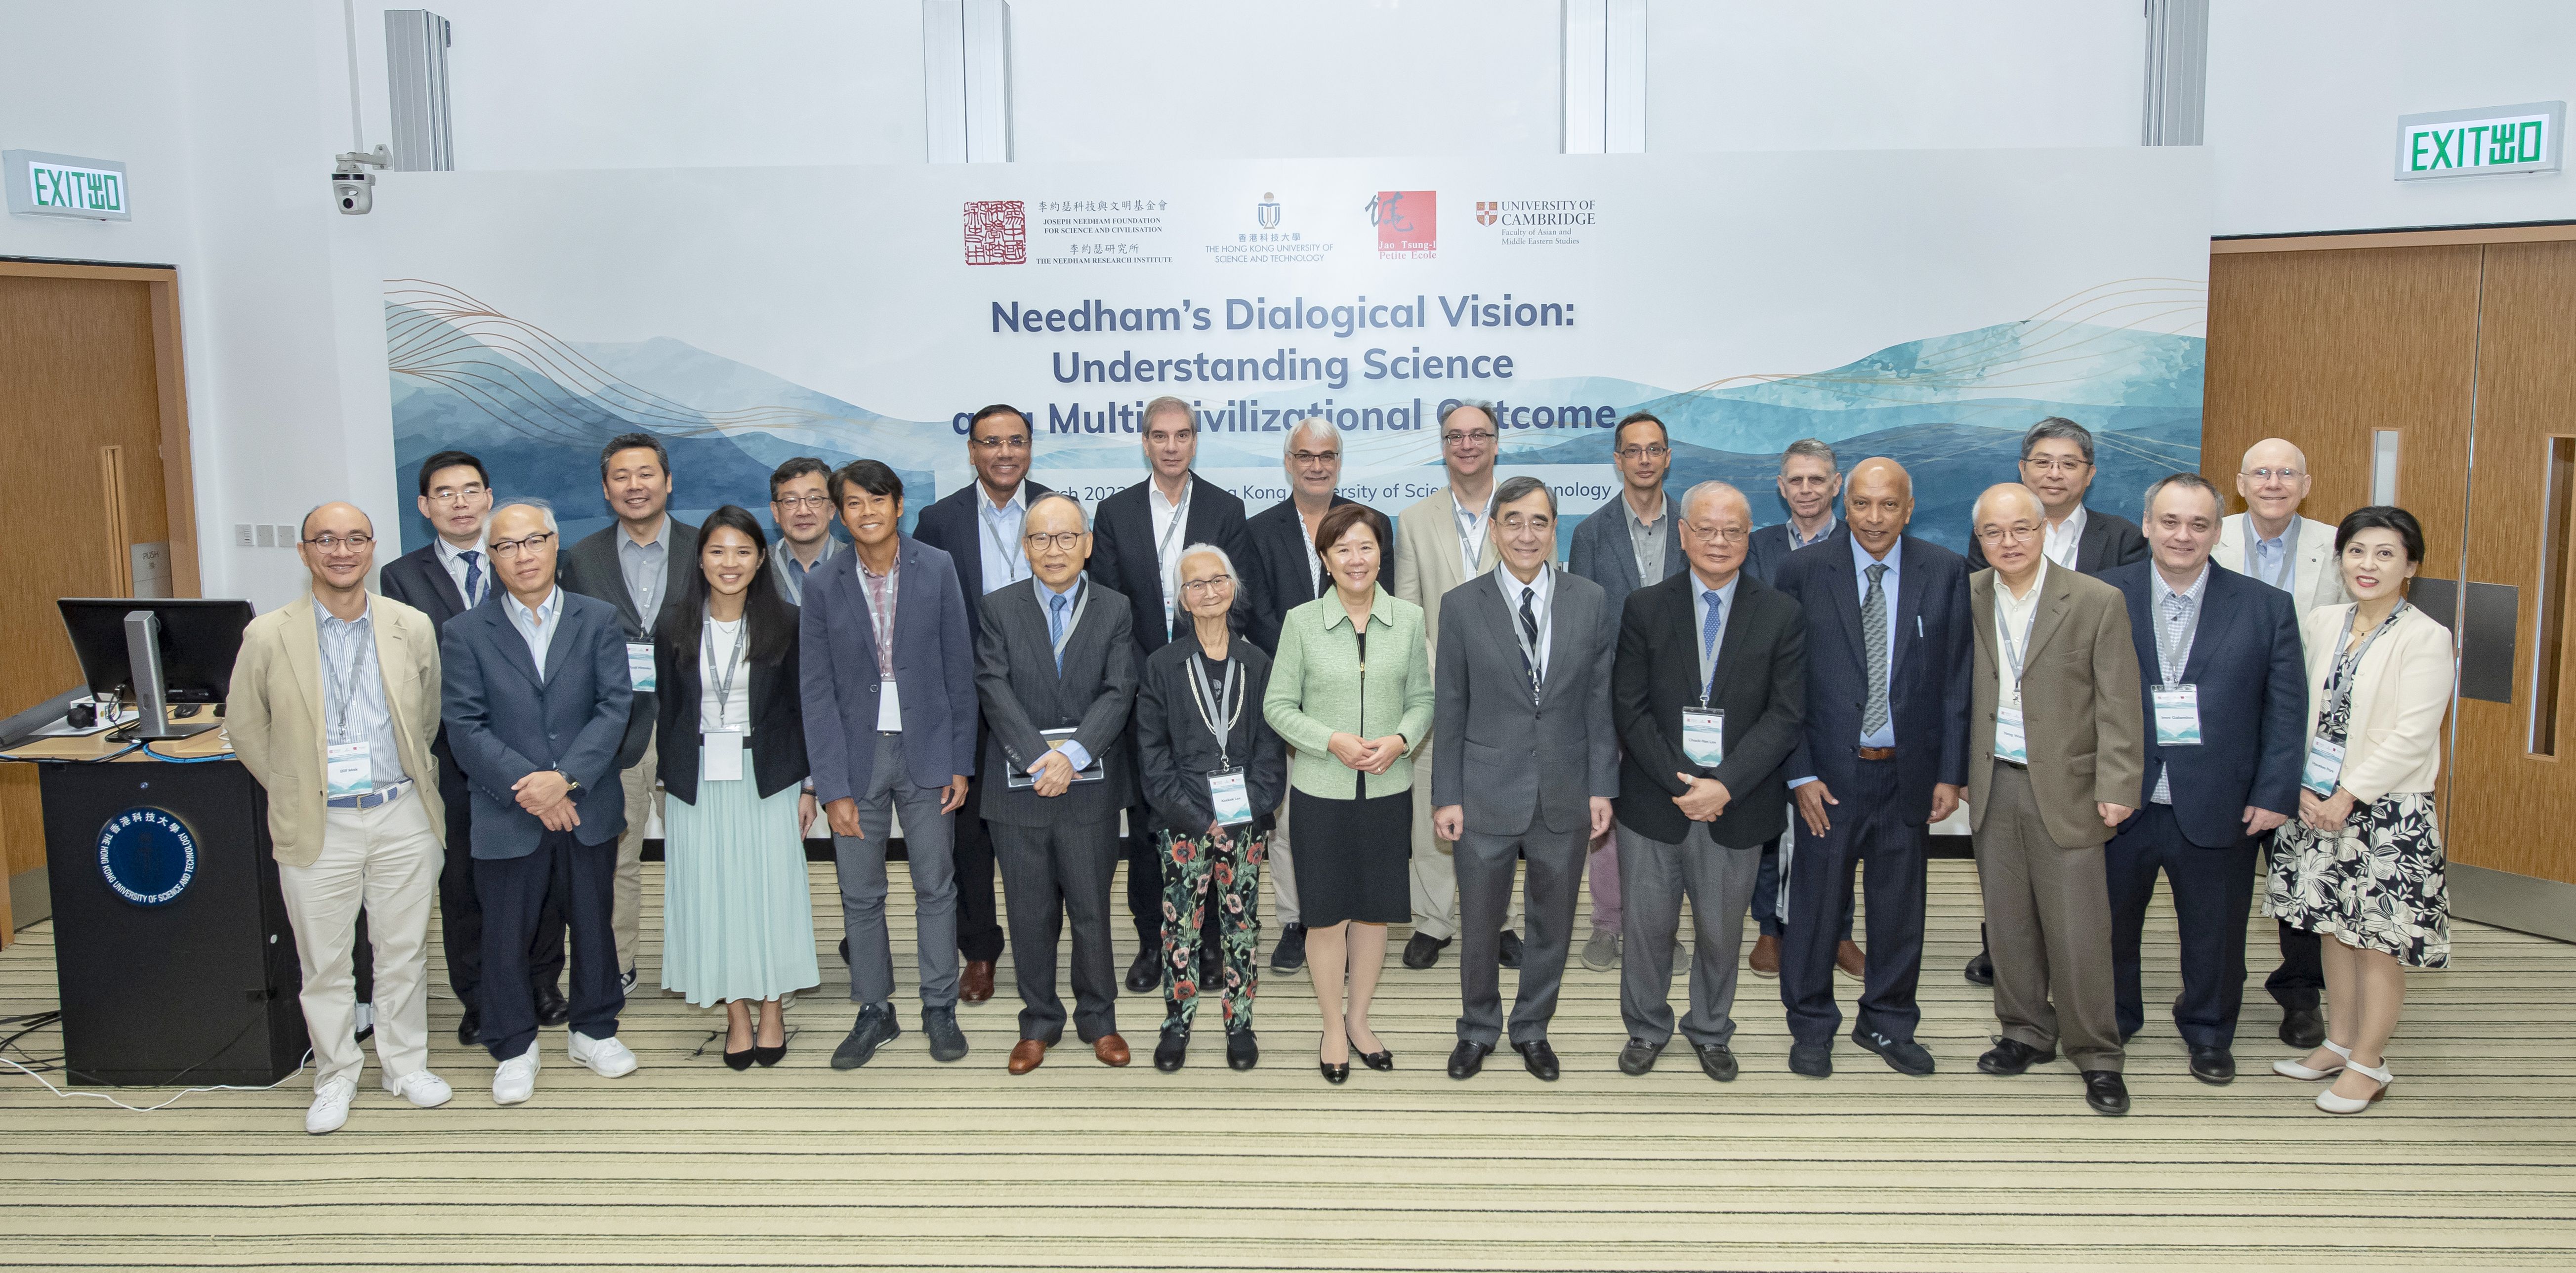 A group photo of Dr. Peter LEE, Chairman of JNFSC (fifth left, first row), Prof. Nancy IP, HKUST President (middle, first row), Prof. WANG Yang, HKUST Vice-President for Institutional Advancement (third right, first row), Dr. Arun BALA, Senior Advisor of JNFSC and Conference Chair (fourth right, first row), Prof LEE Chack-fan, Director of the HKU - Jao Tsung-I Petite Ecole (fifth right, first row), and other participants of the Needham Conference 2023. 